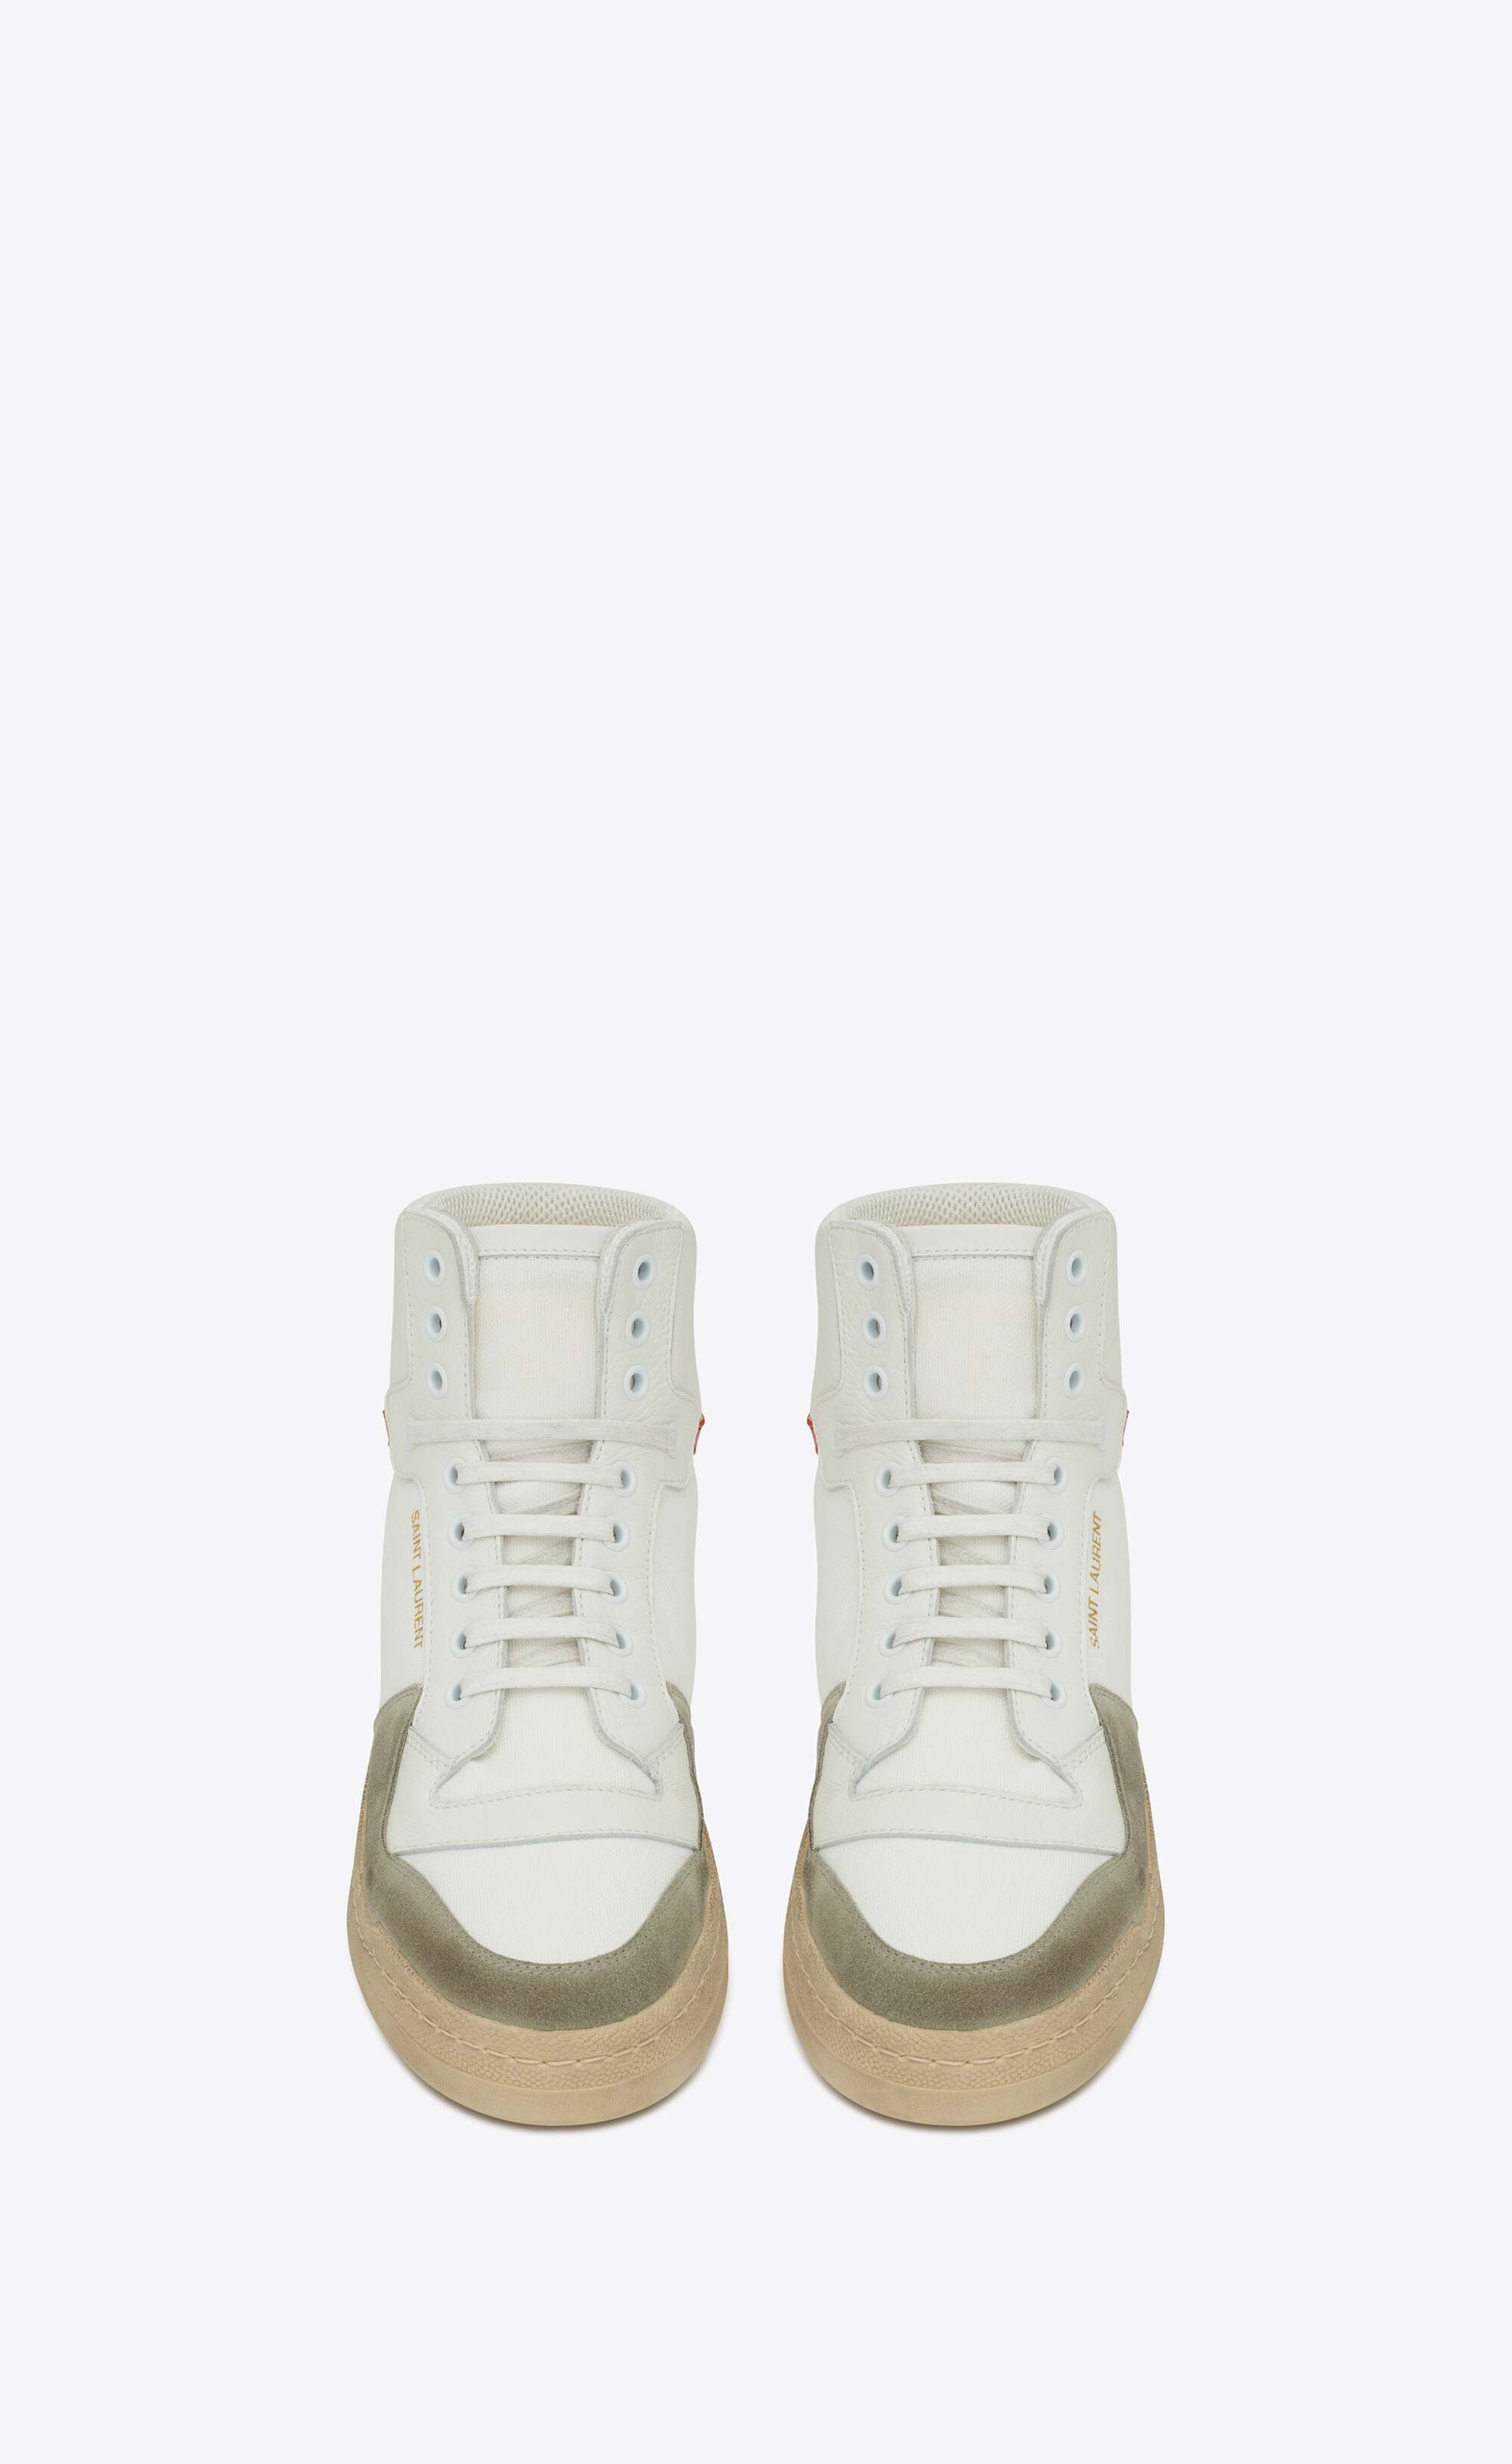 sl24 mid-top sneakers in canvas, leather and suede - 2